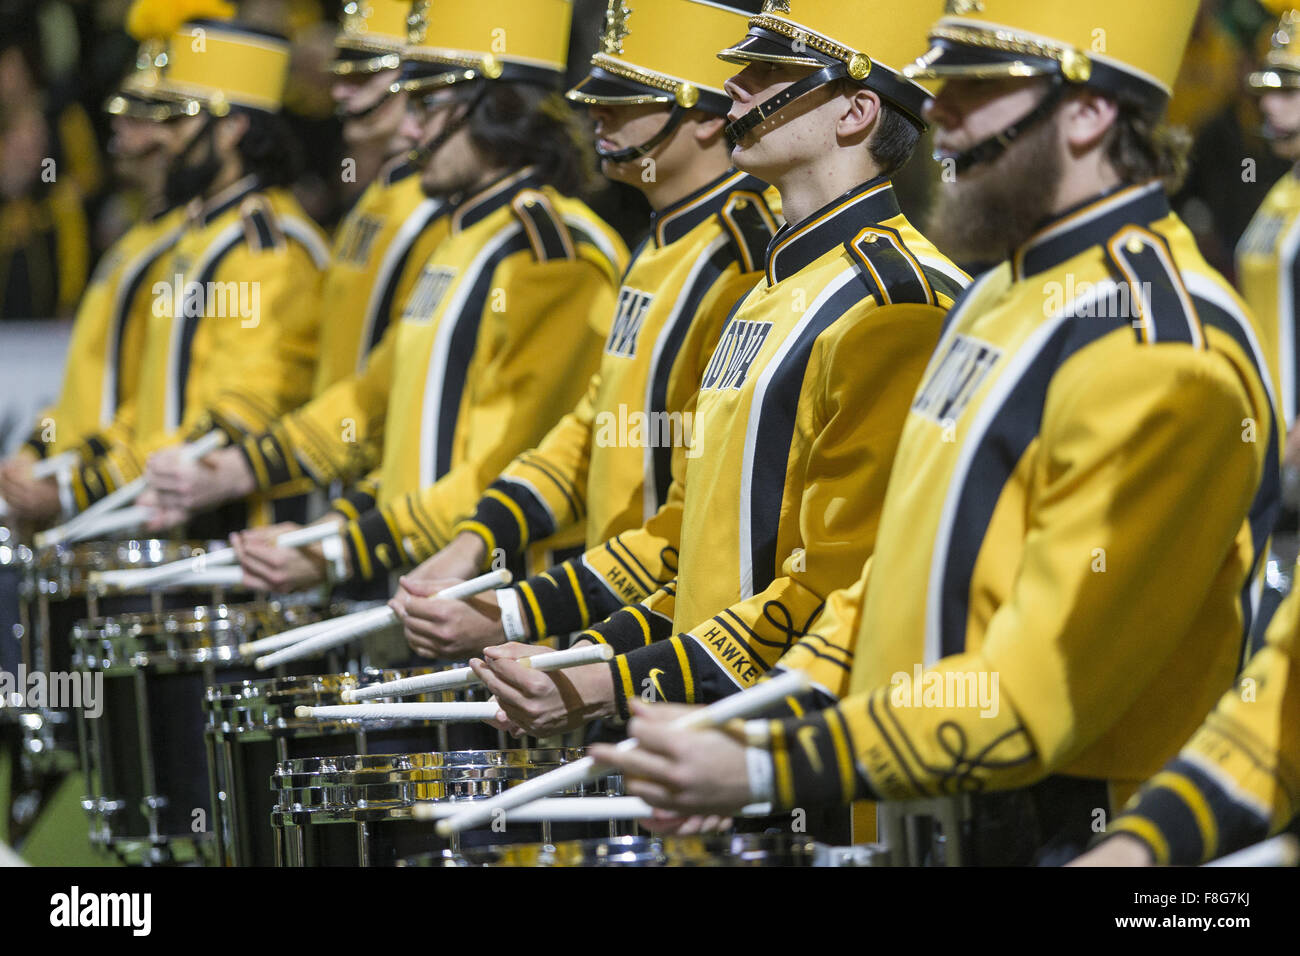 Indianapolis, Iowa, USA. 5th Dec, 2015. The Iowa Drumline play for the fans at the Big Ten Experience at the Indiana Convention Center in Indianapolis, In., Saturday, Dec. 5th, 2015. © Louis Brems/Quad-City Times/ZUMA Wire/Alamy Live News Stock Photo